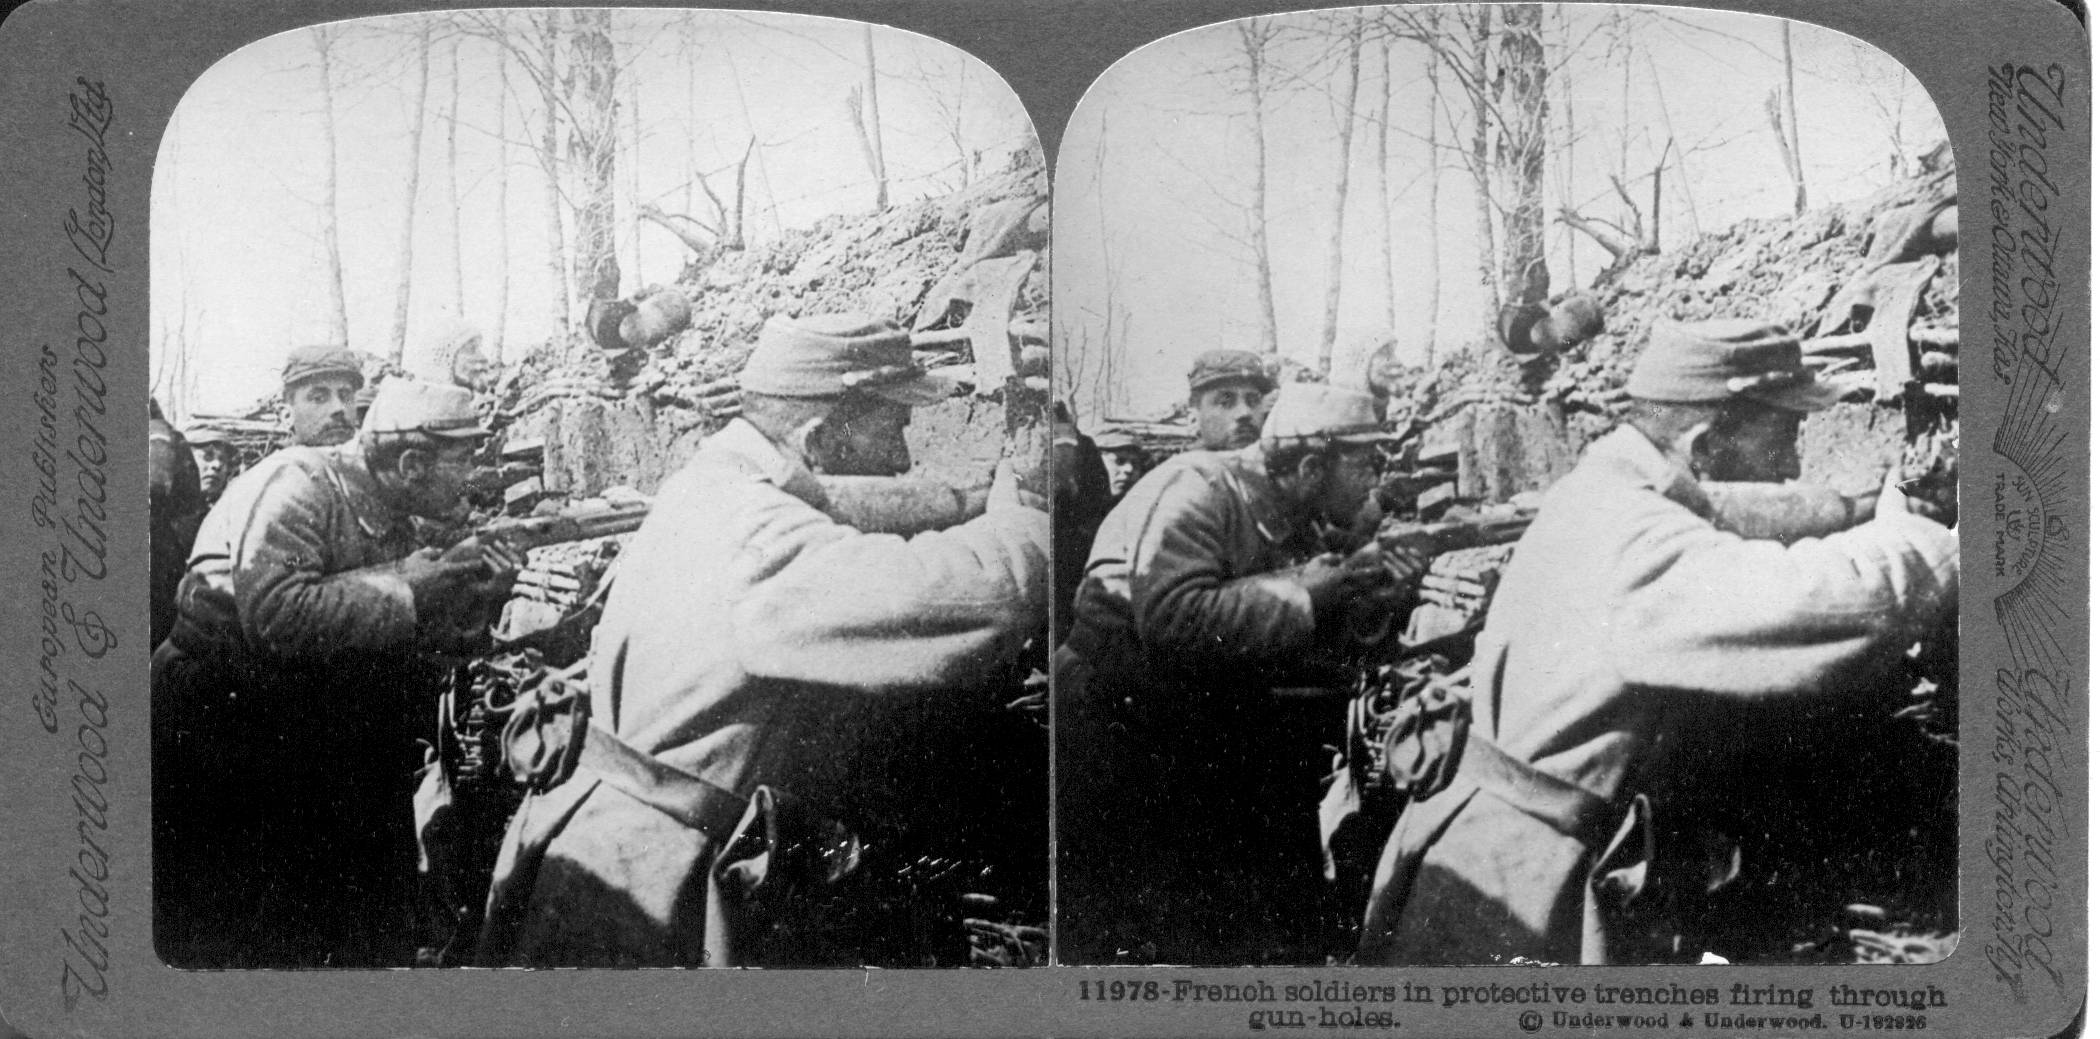 French soldiers in protective trenches firing through gun-holes